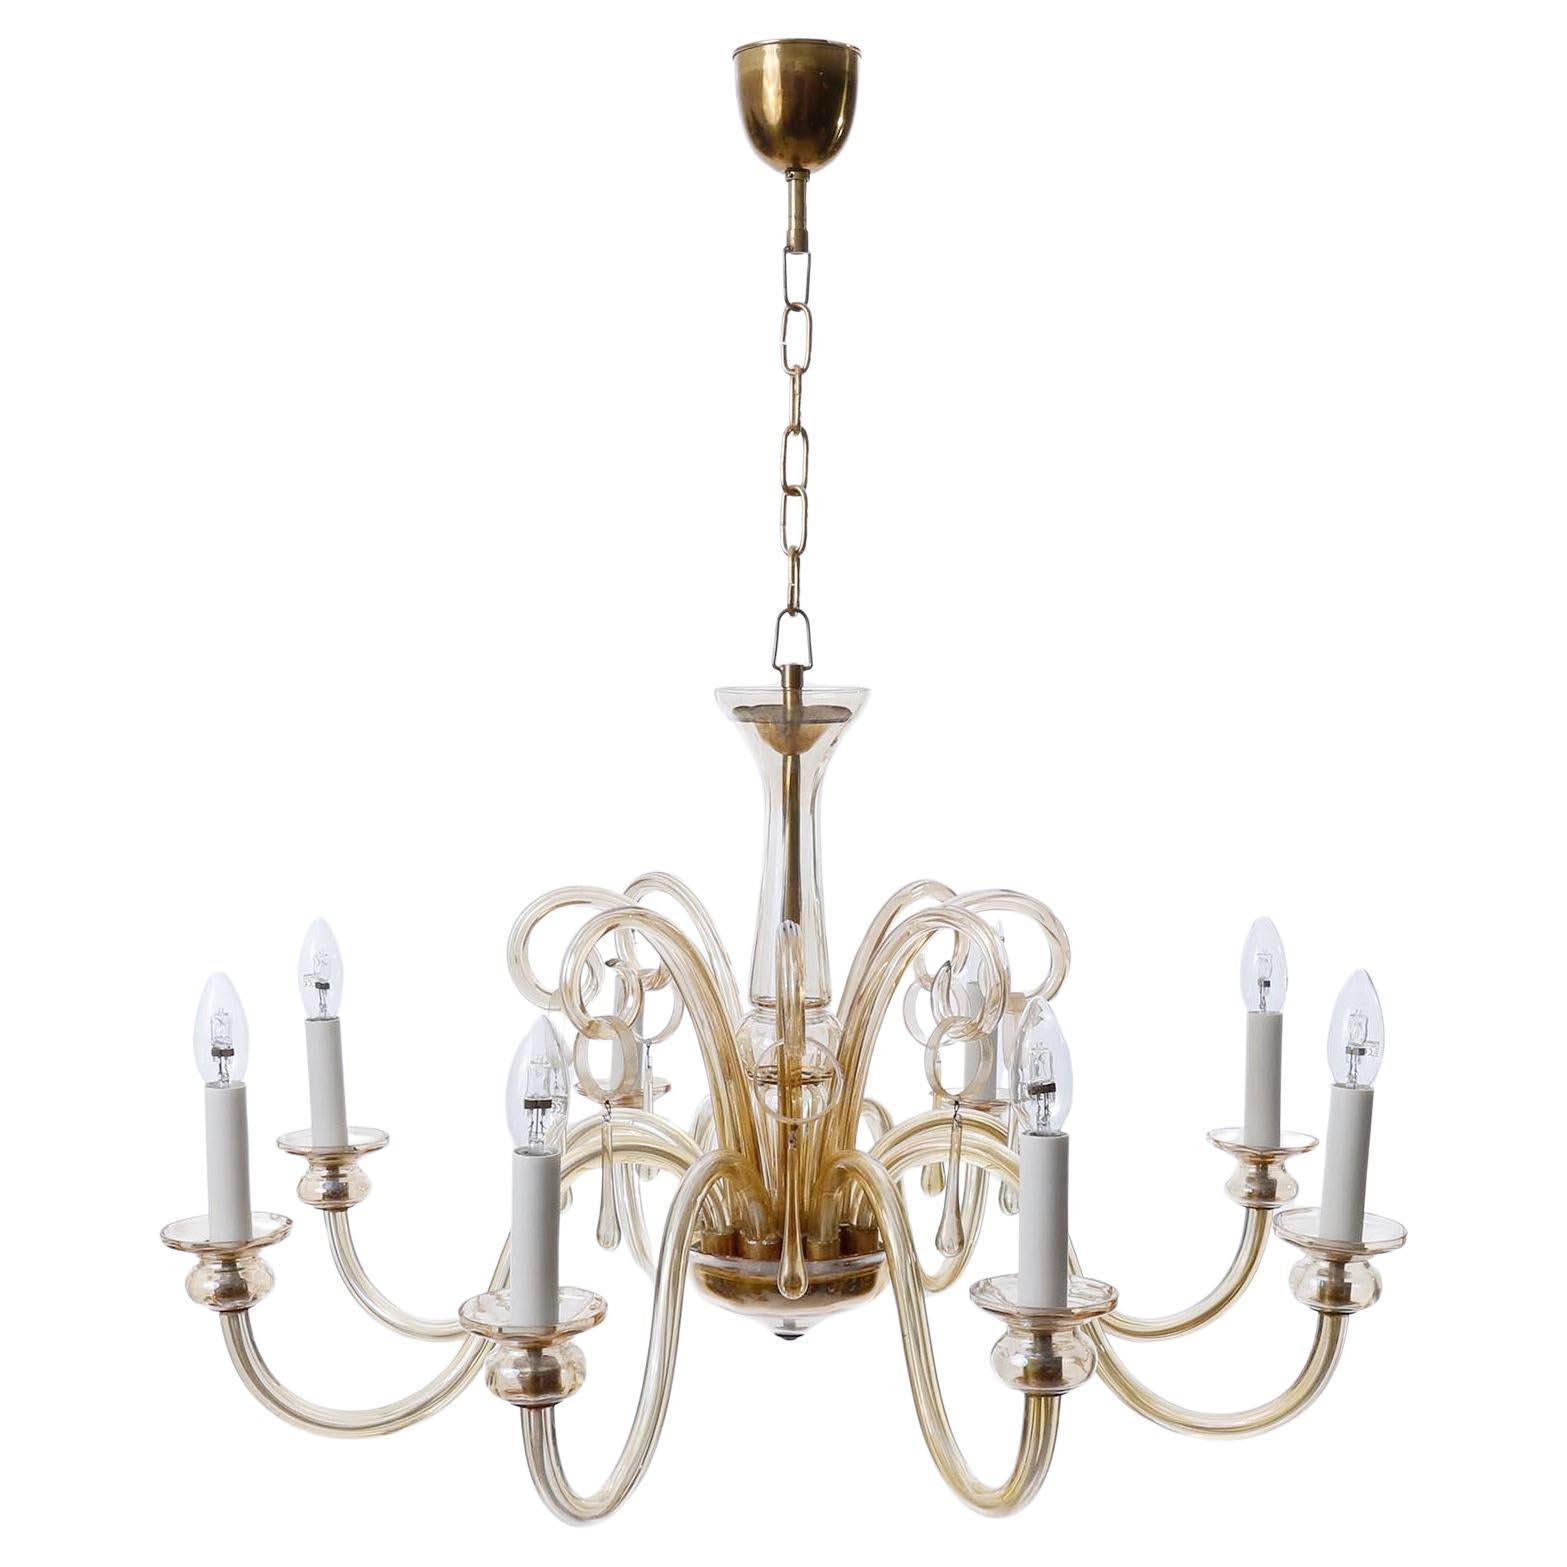 A large and beautiful eight-armed Art-Deco style Mid-Century Modern chandelier made of brass and mouth-blown amber Murano glass.
It is in very good condition and ready to use.
Measures: Height of body without chain: 18 inch (46 cm), current overall